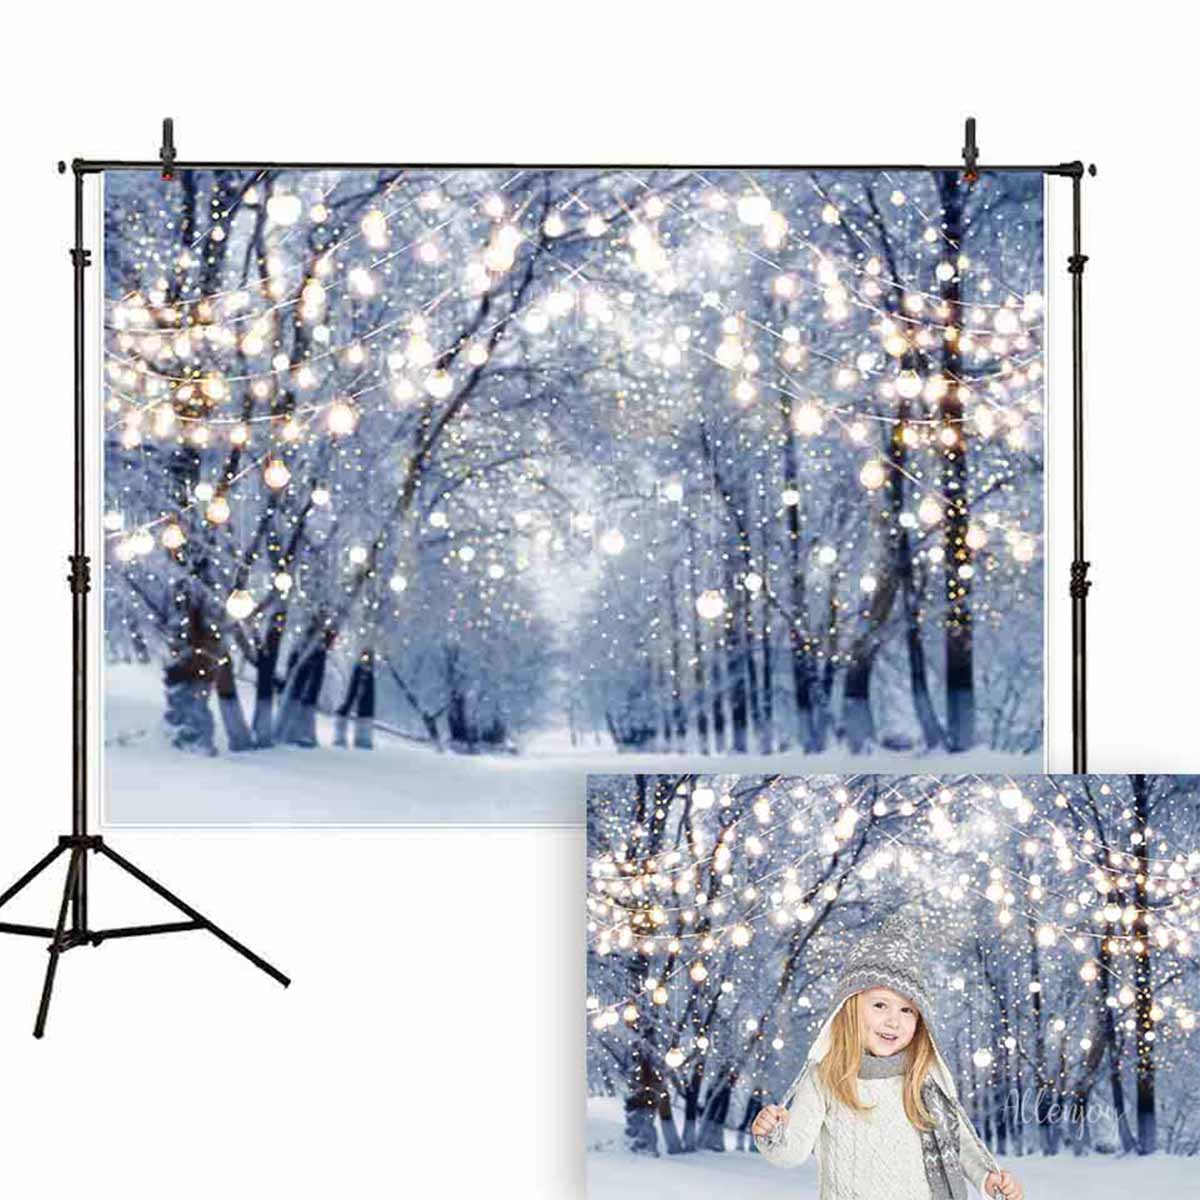 5x3FT-7x5FT-8x6FT-Light-Strip-Winter-Snow-Forest-Street-Photography-Backdrop-Background-Studio-Prop-1609475-5